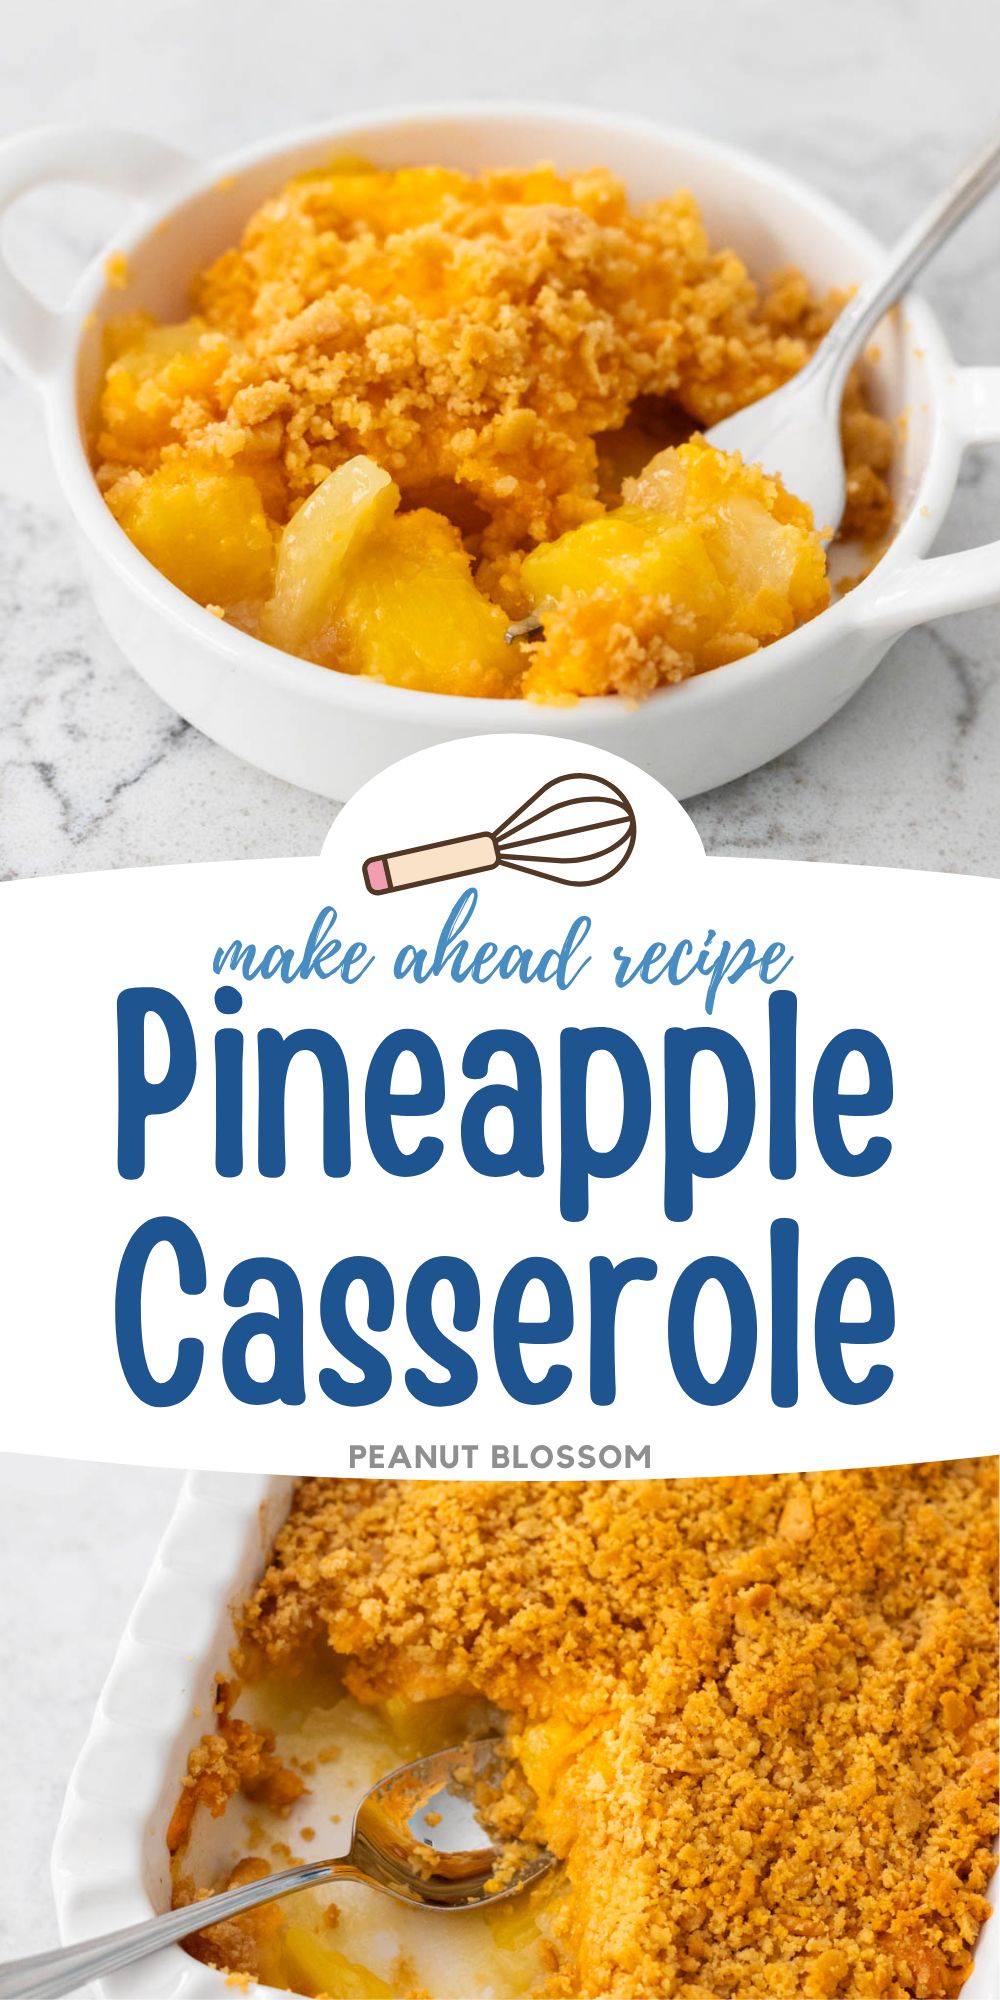 The photo collage shows a close-up photo of a serving of pineapple casserole with pineapple chunks and a cracker topping next to a photo of the baking dish filled with the casserole.